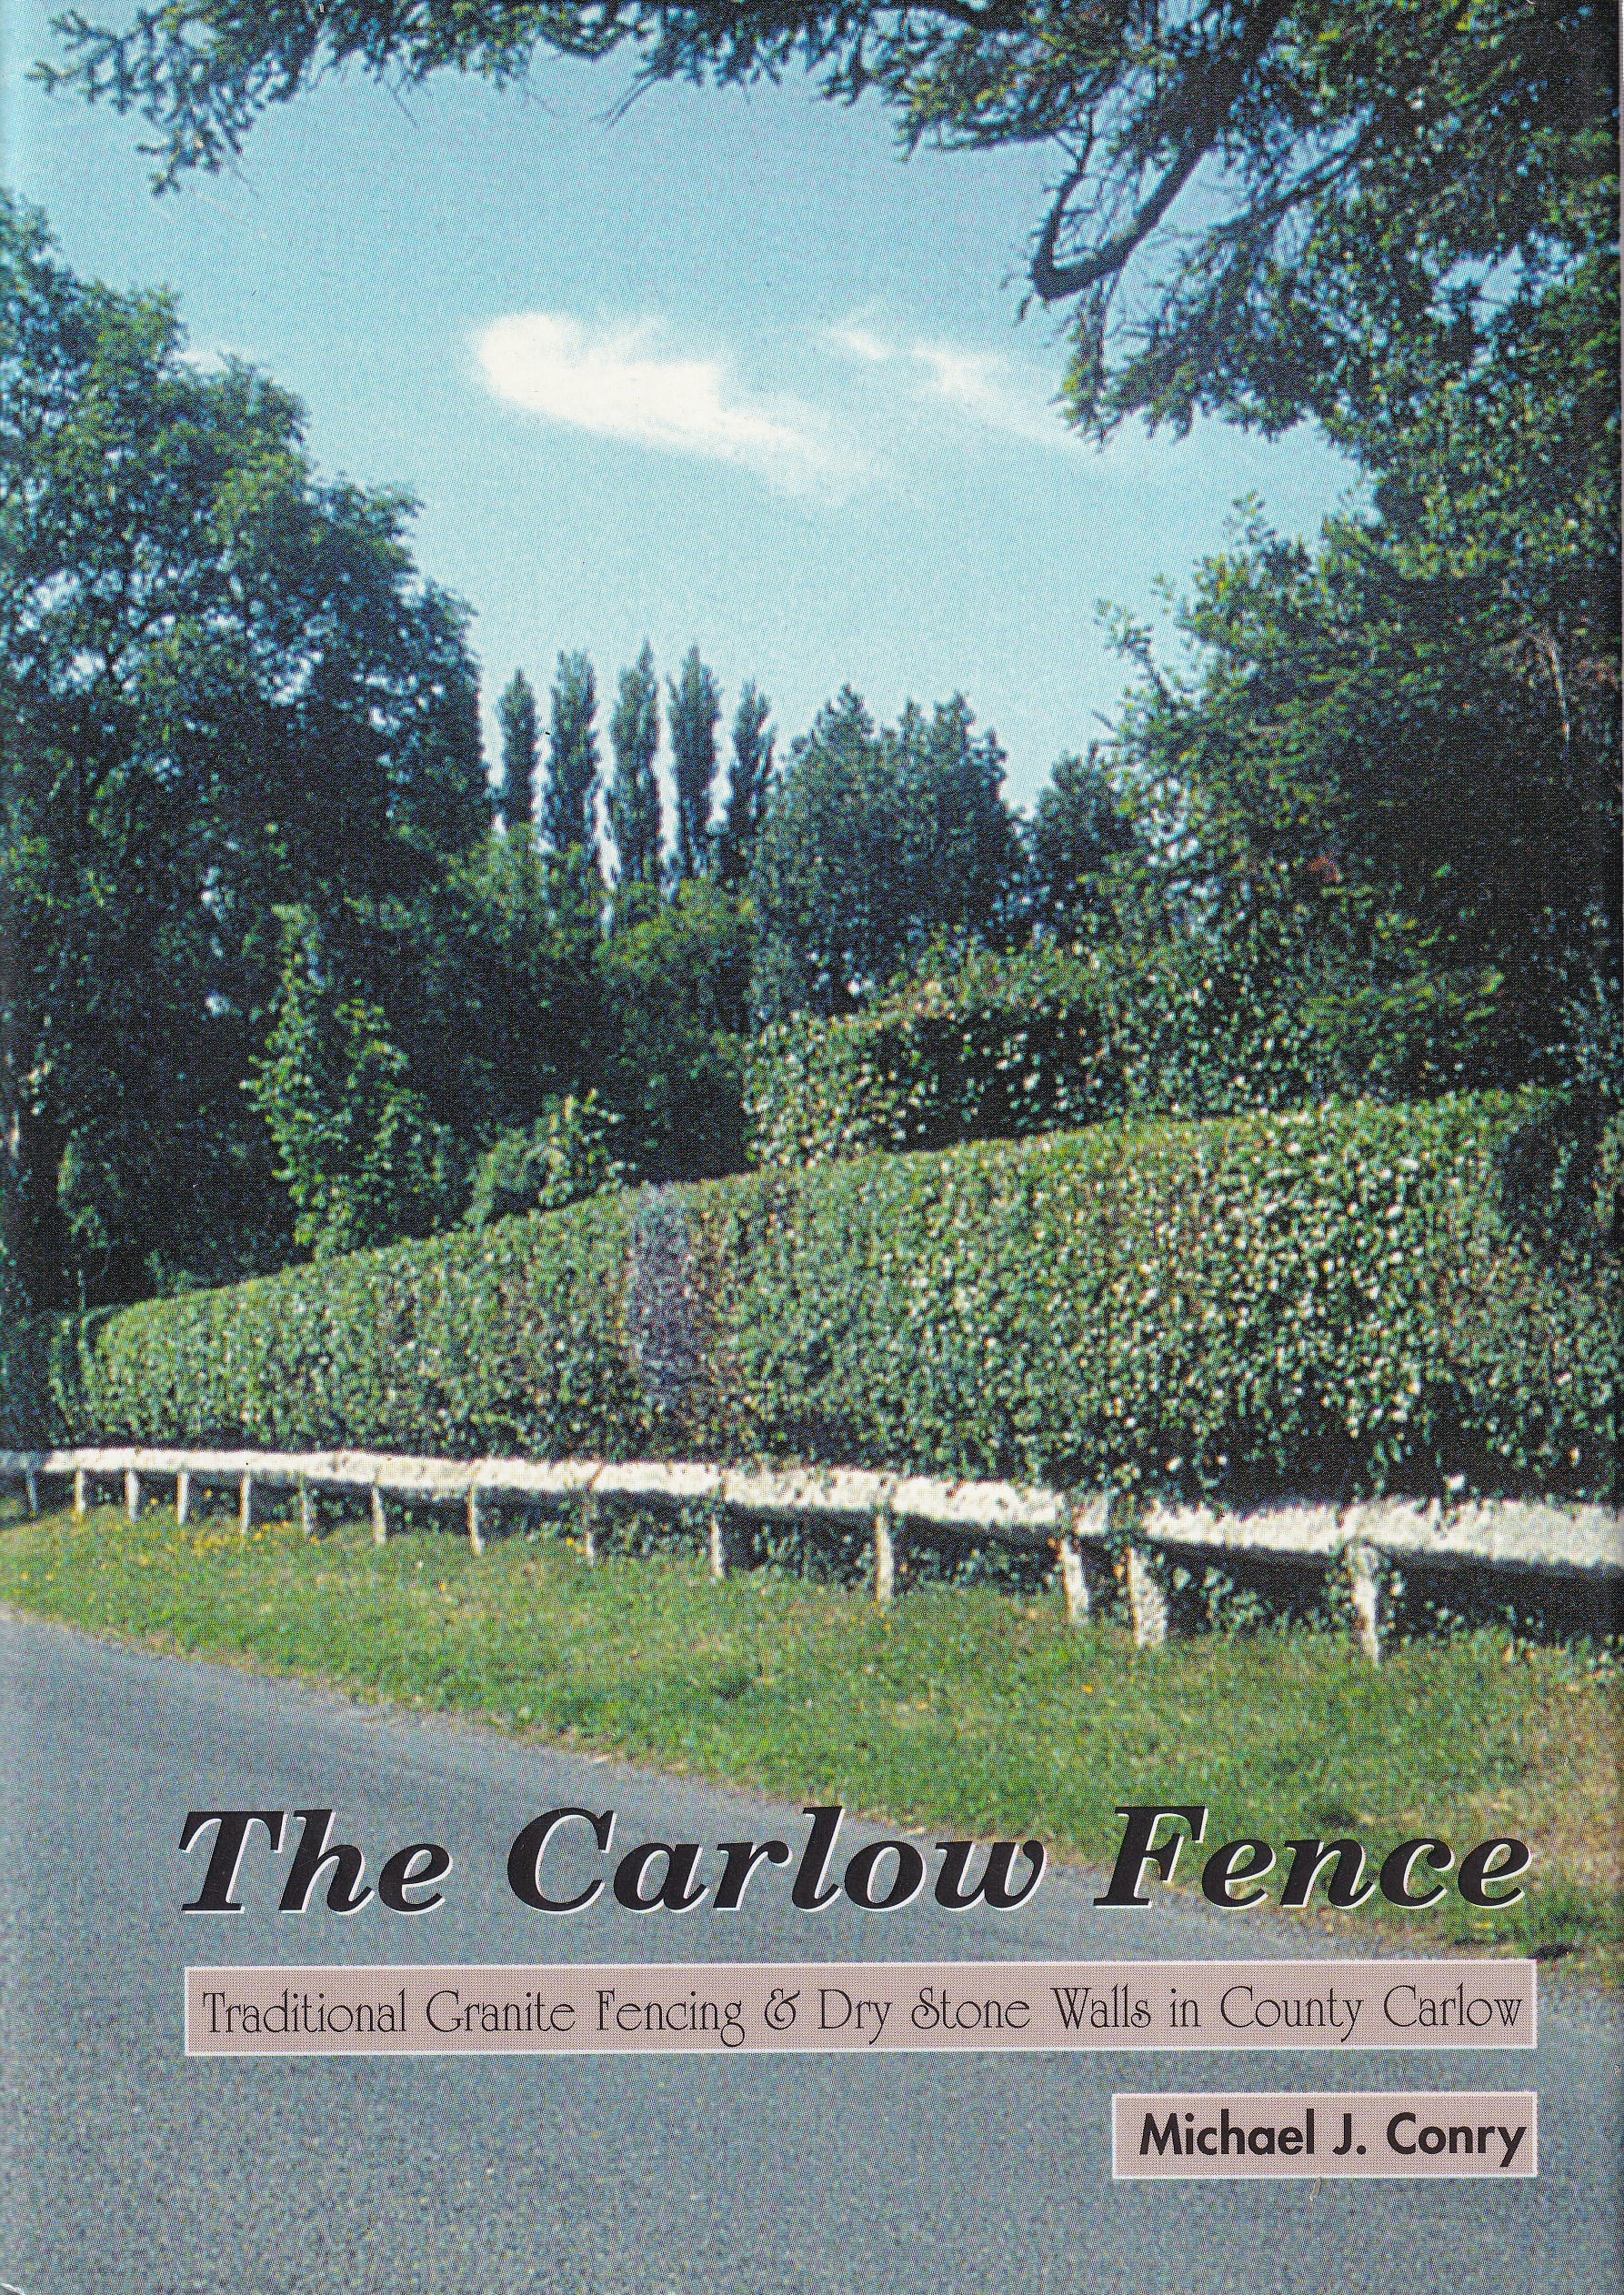 The Carlow fence: Traditional Granite Fencing and Dry Stone Walls in Country Carlow | Michael J. Conry | Charlie Byrne's